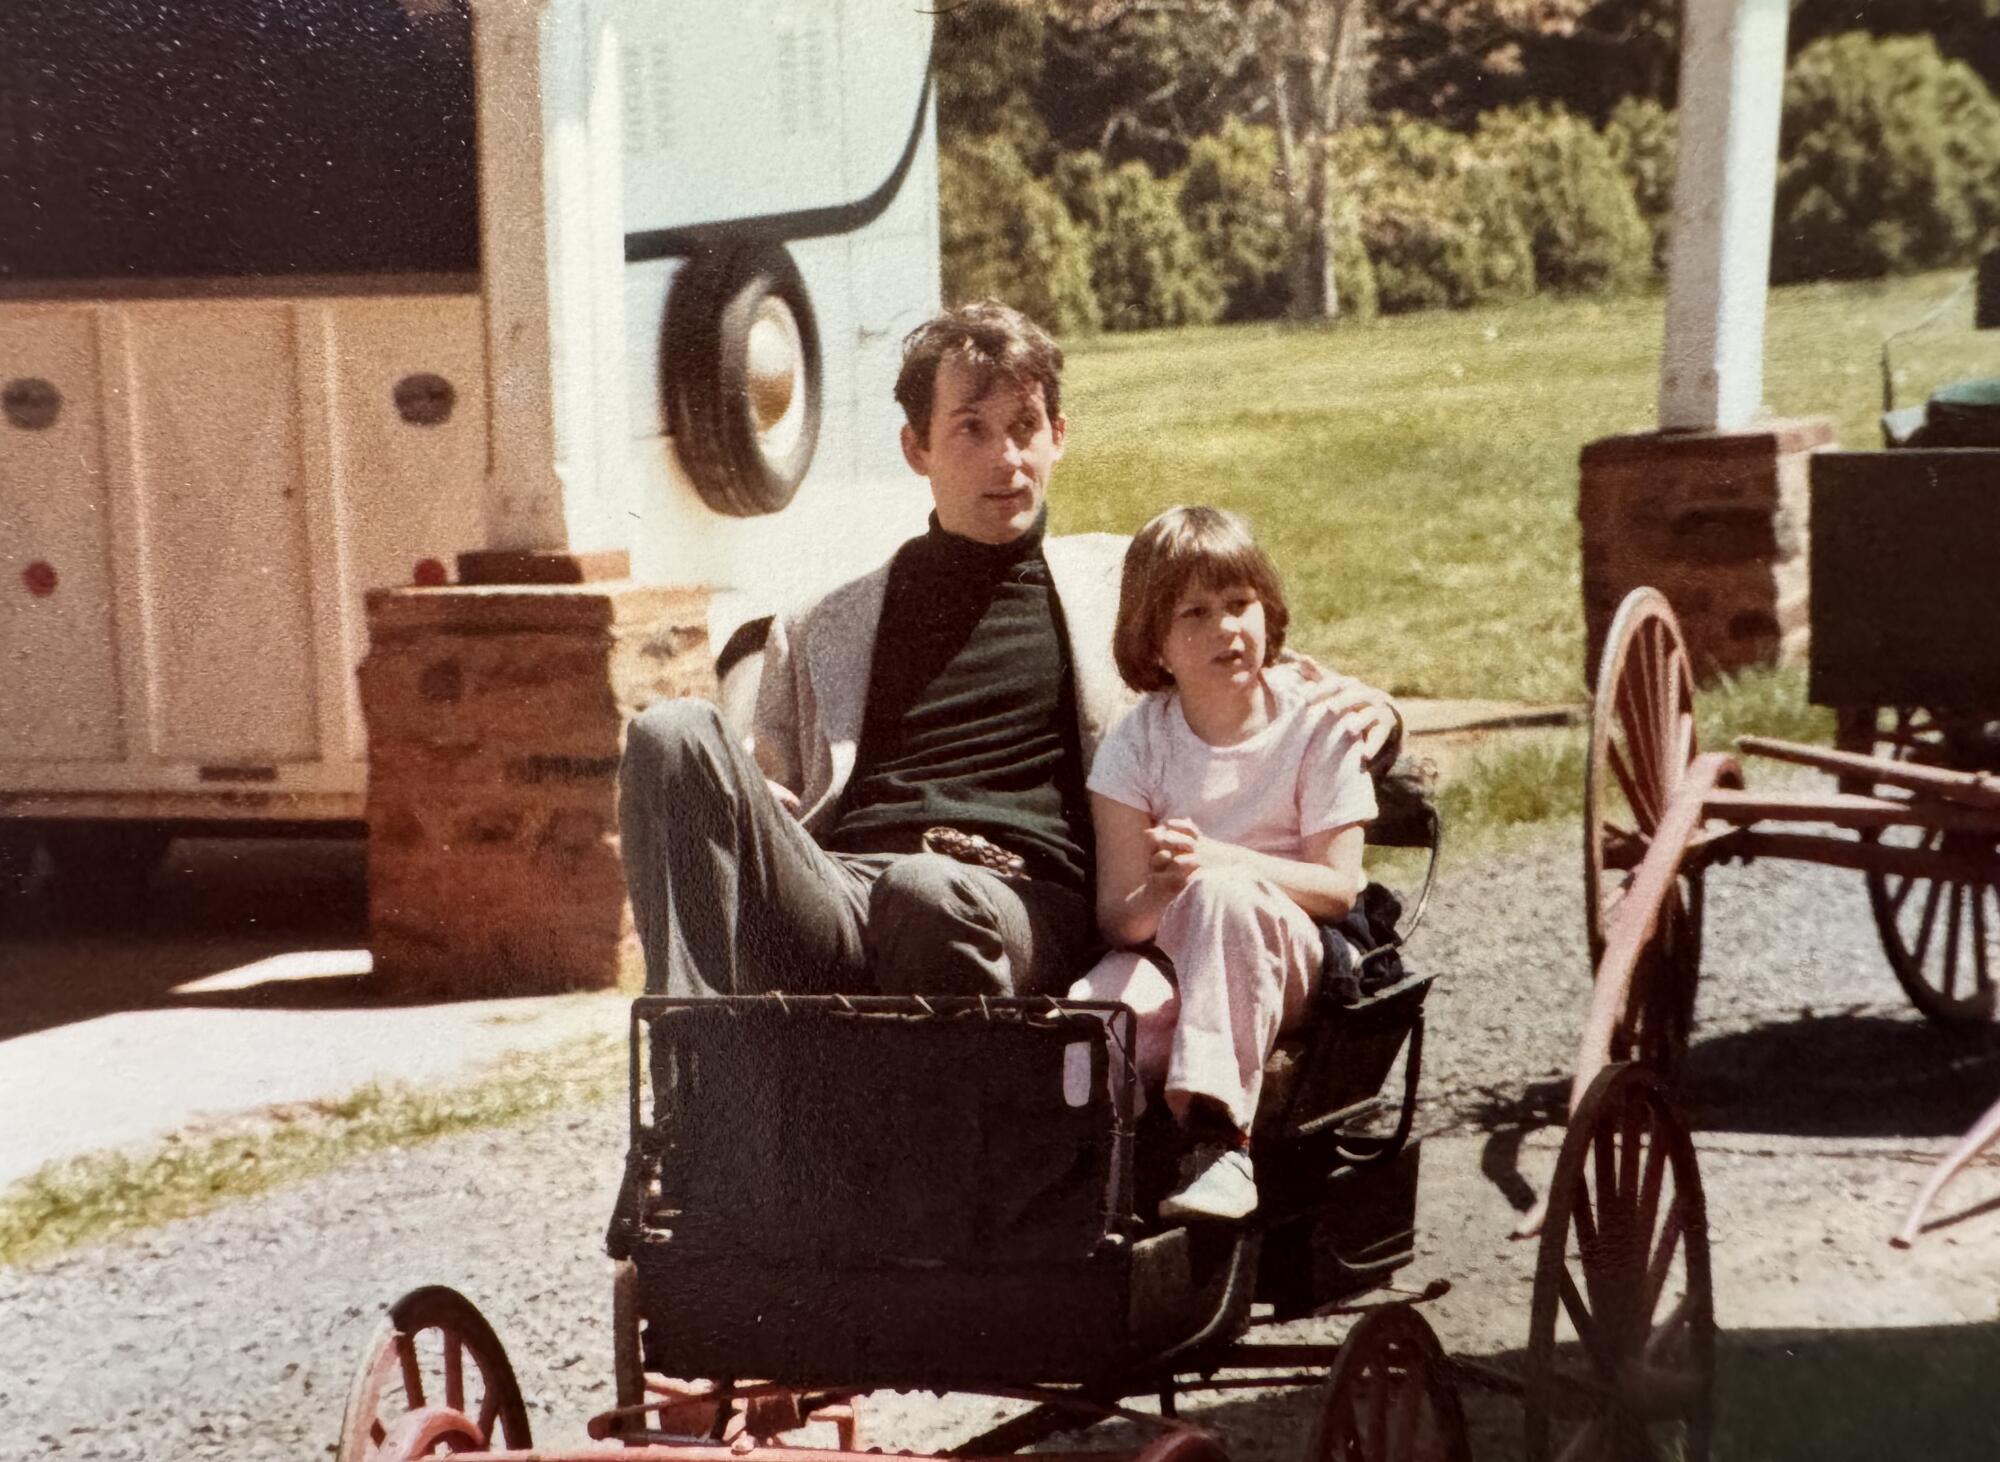 A father and daughter are sitting together in a car.  